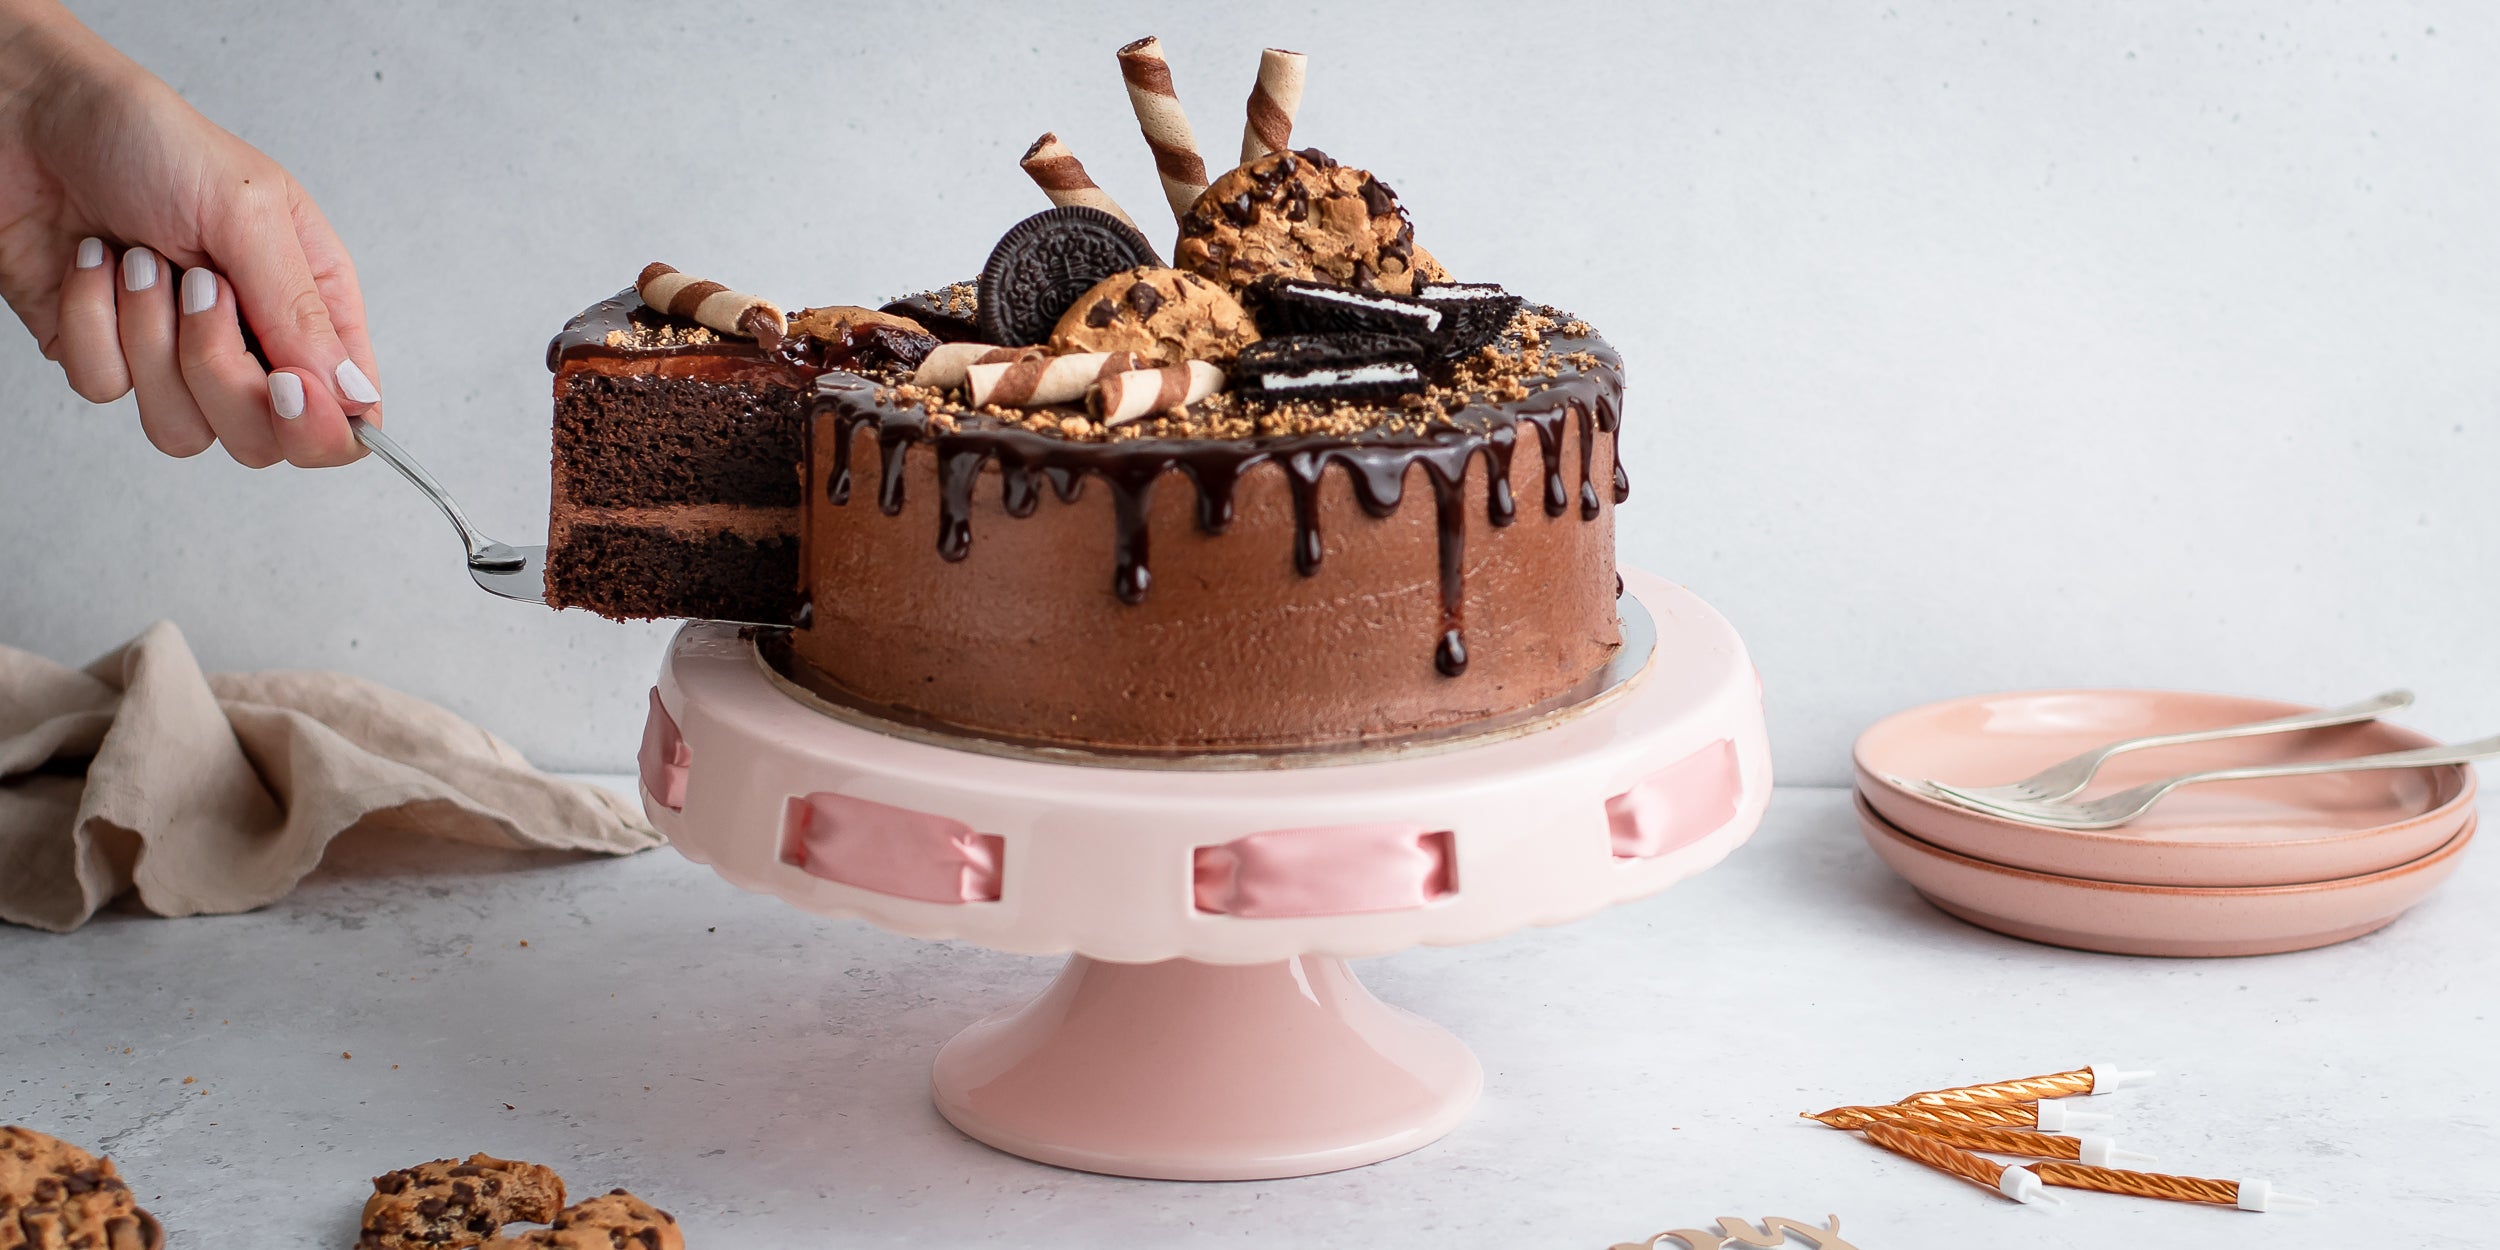 Cookie Dough Ice Cream Cake is Here to Make Your D